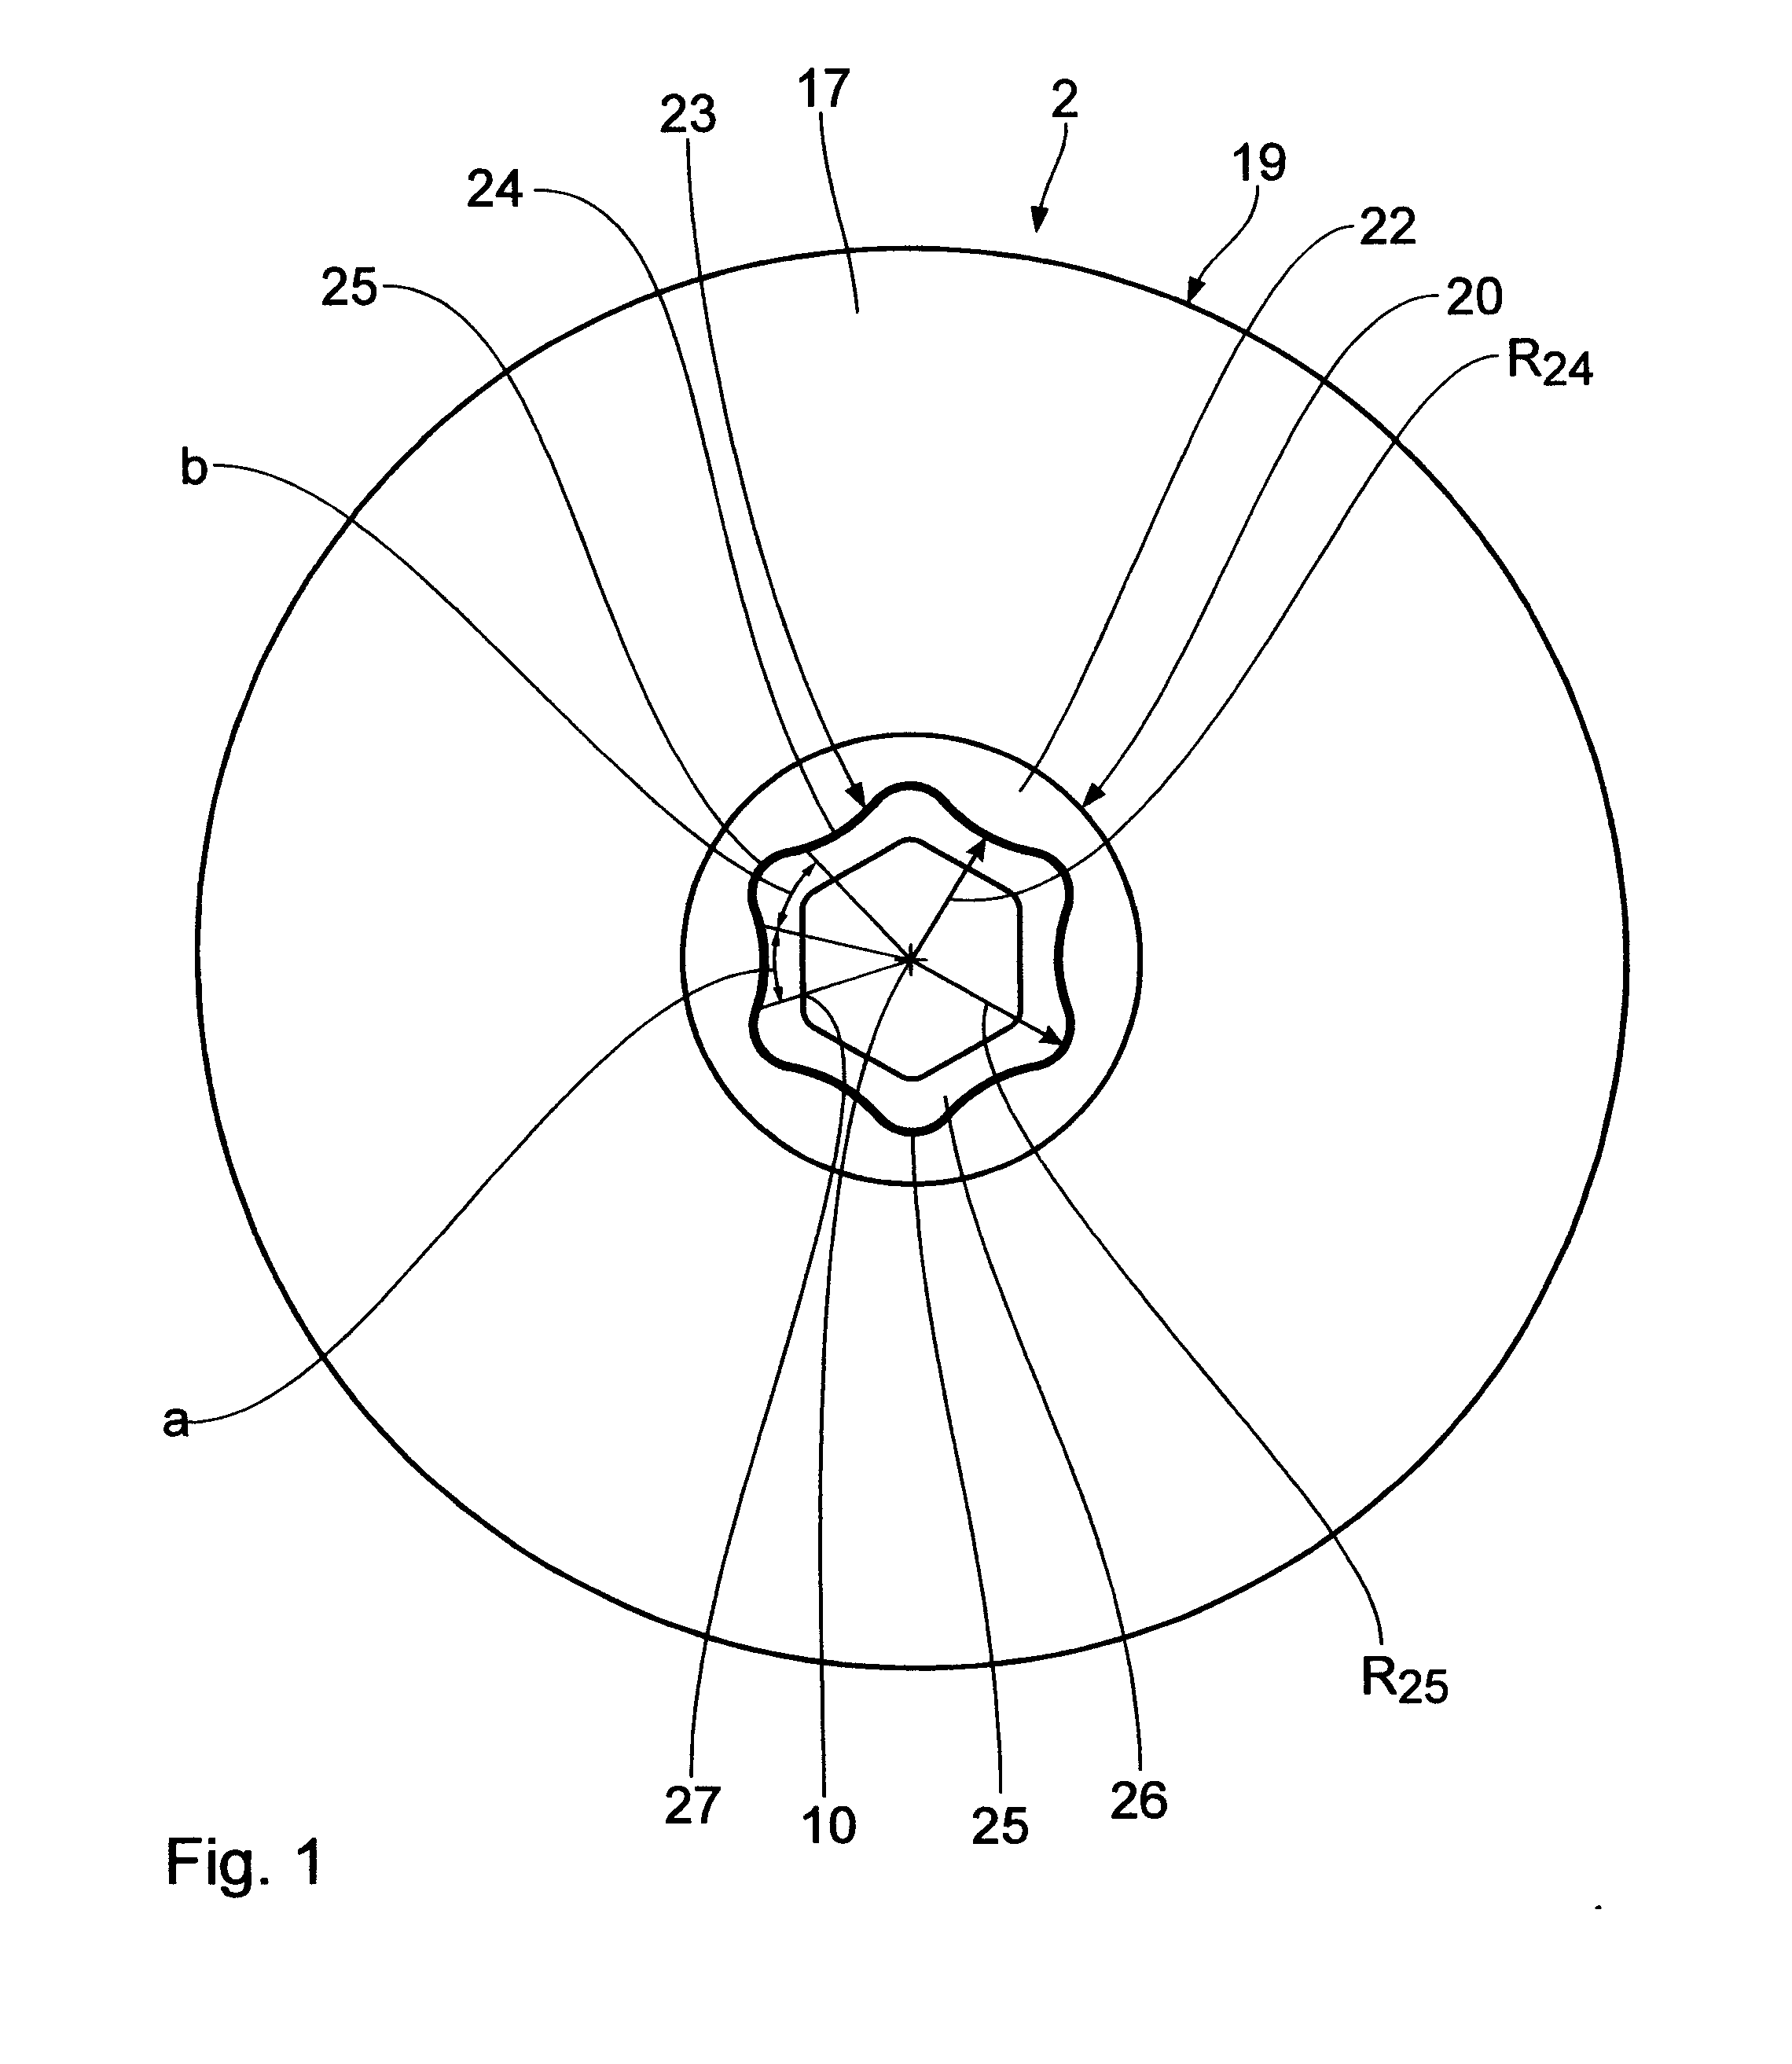 Tool with a carrier part and a disc-shaped working part